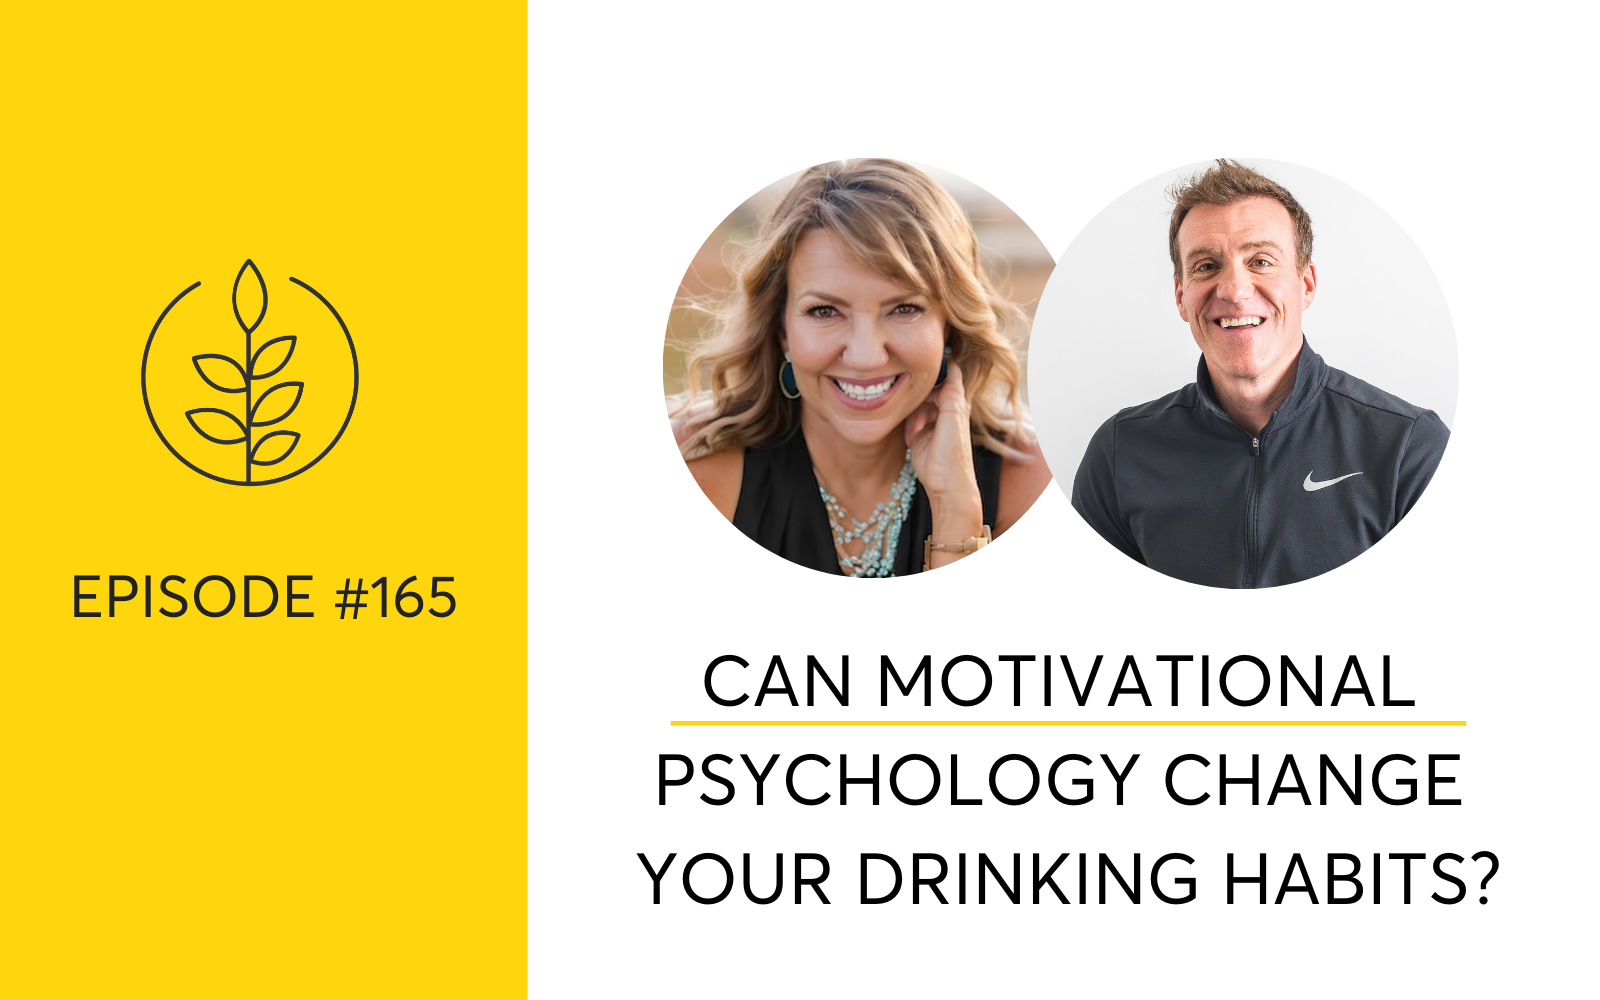 Can Your Drinking Habits Change When You Use Motivational Psychology?